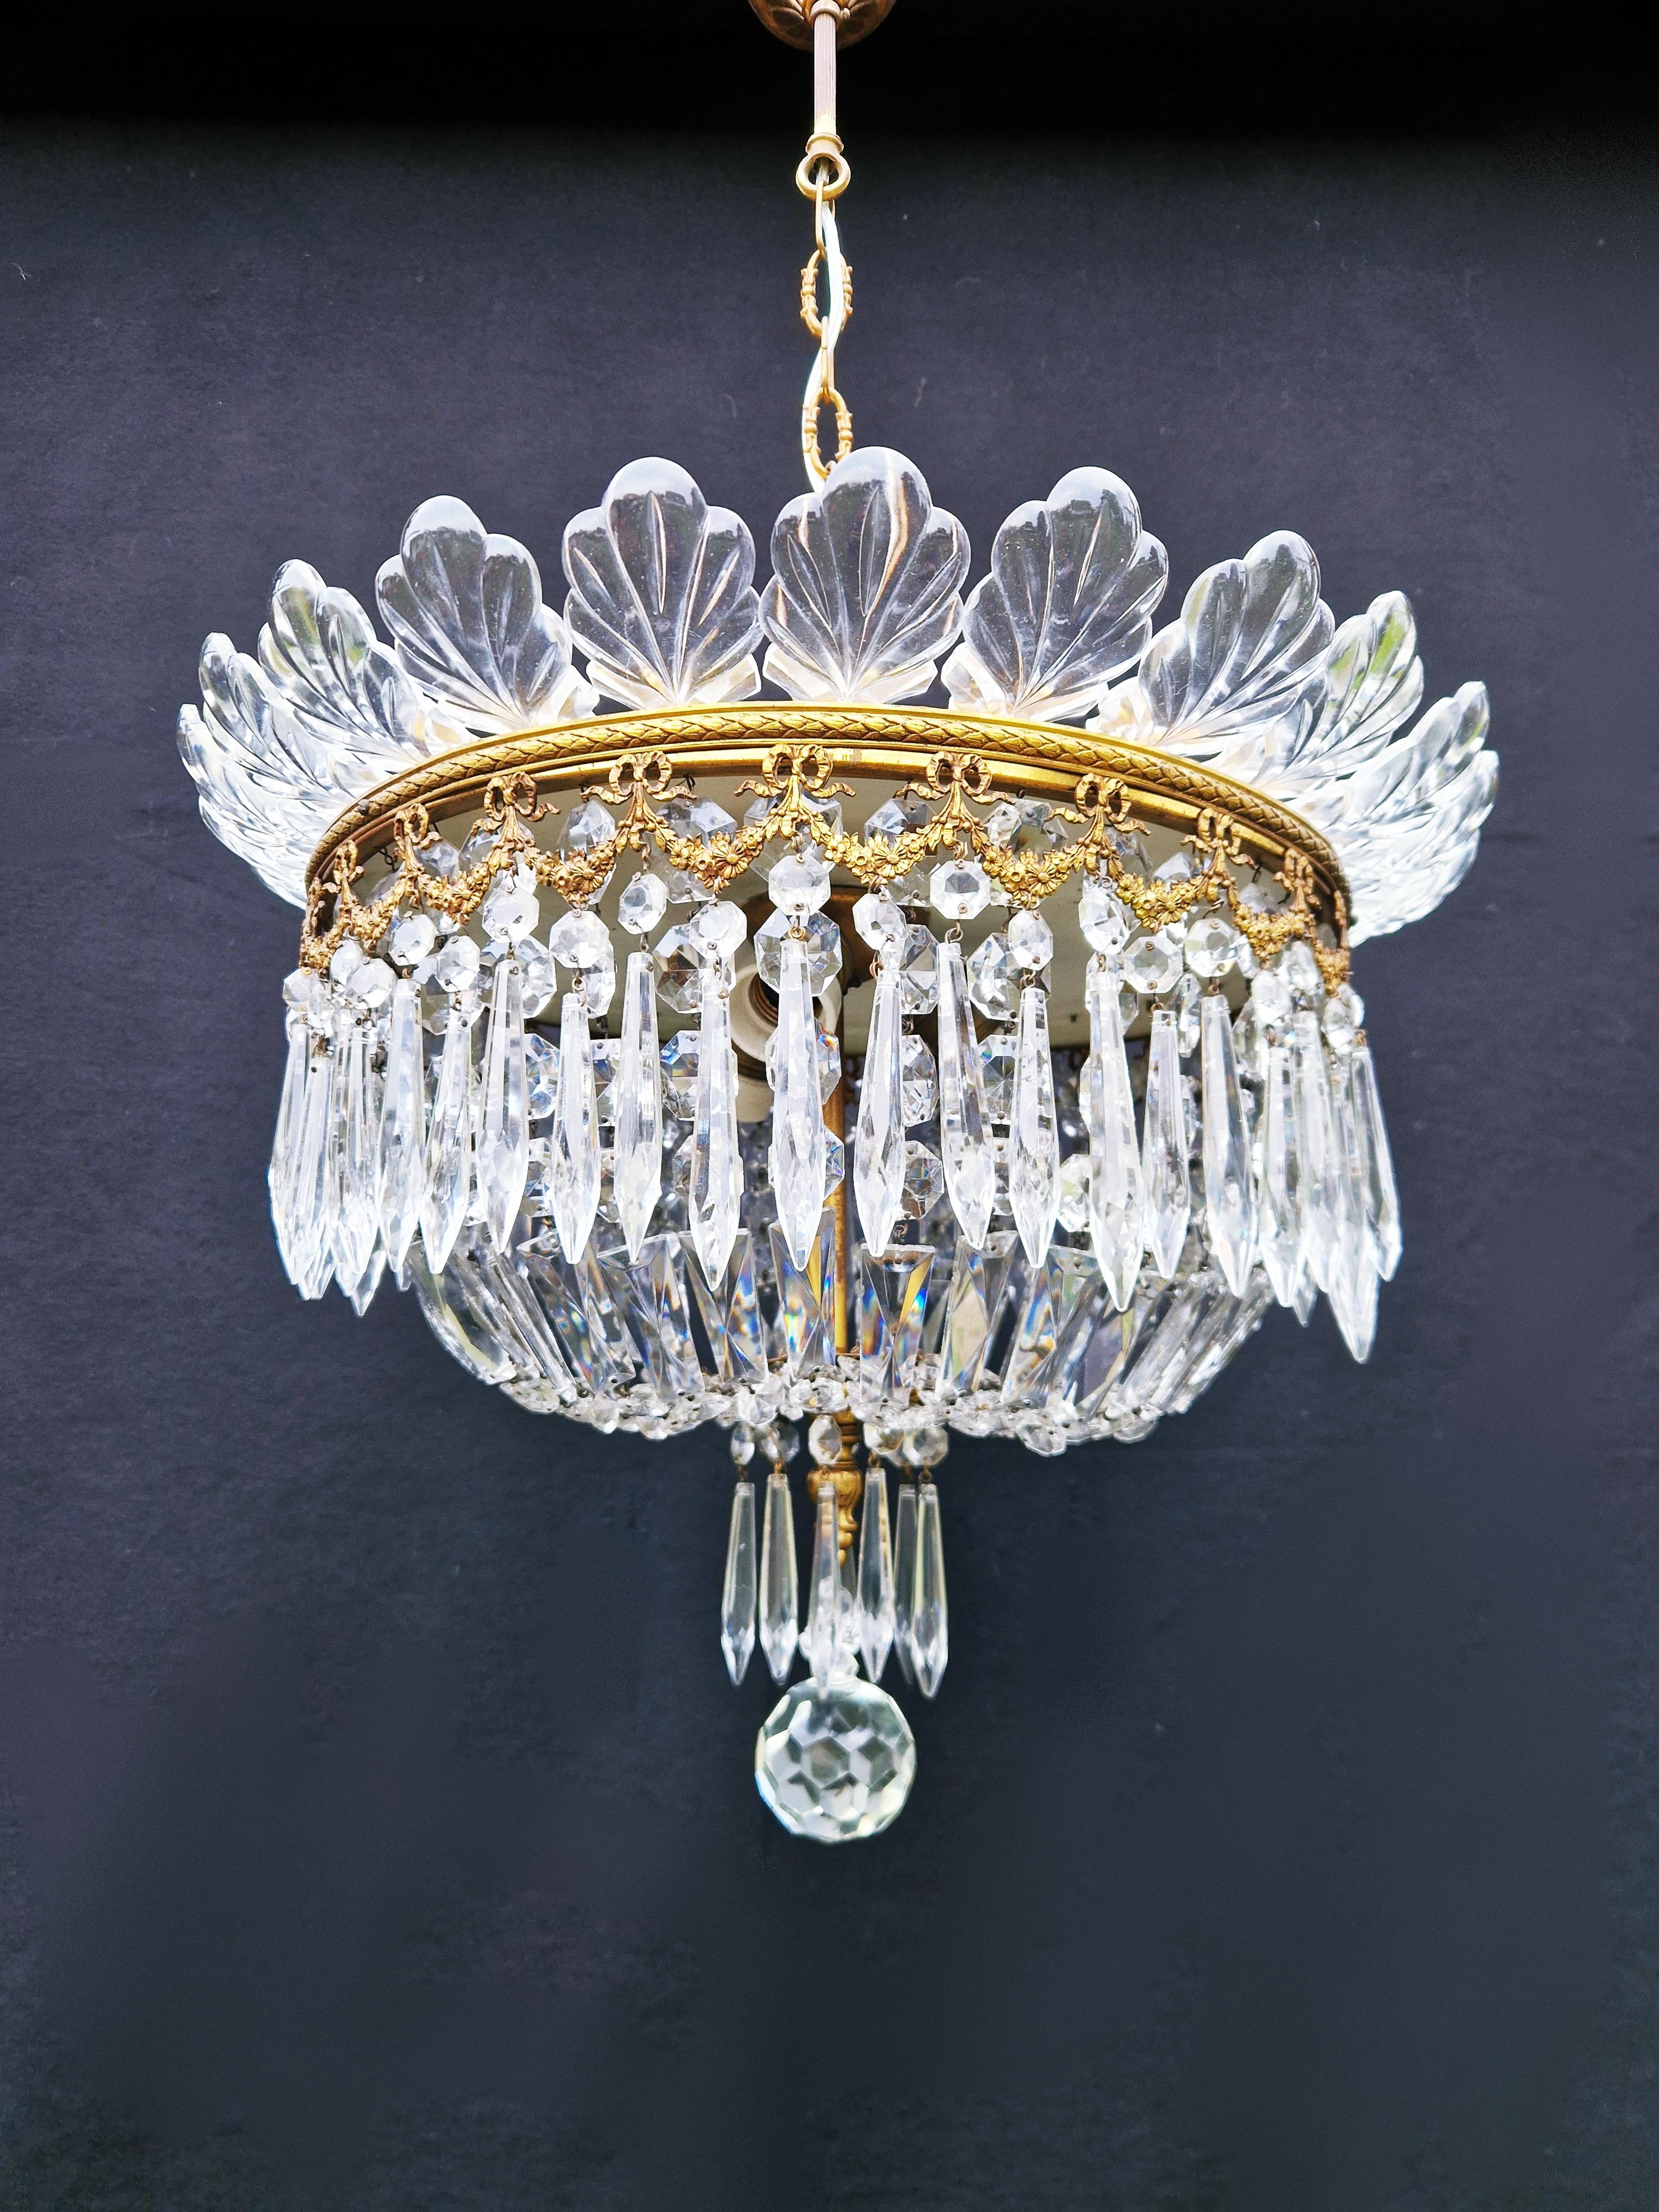 Introducing our beloved old chandelier, restored with love and expertise in Berlin. Its electrical wiring is compatible with the US, as it has been professionally re-wired and is ready to hang. Not a single crystal is missing, and the cabling has